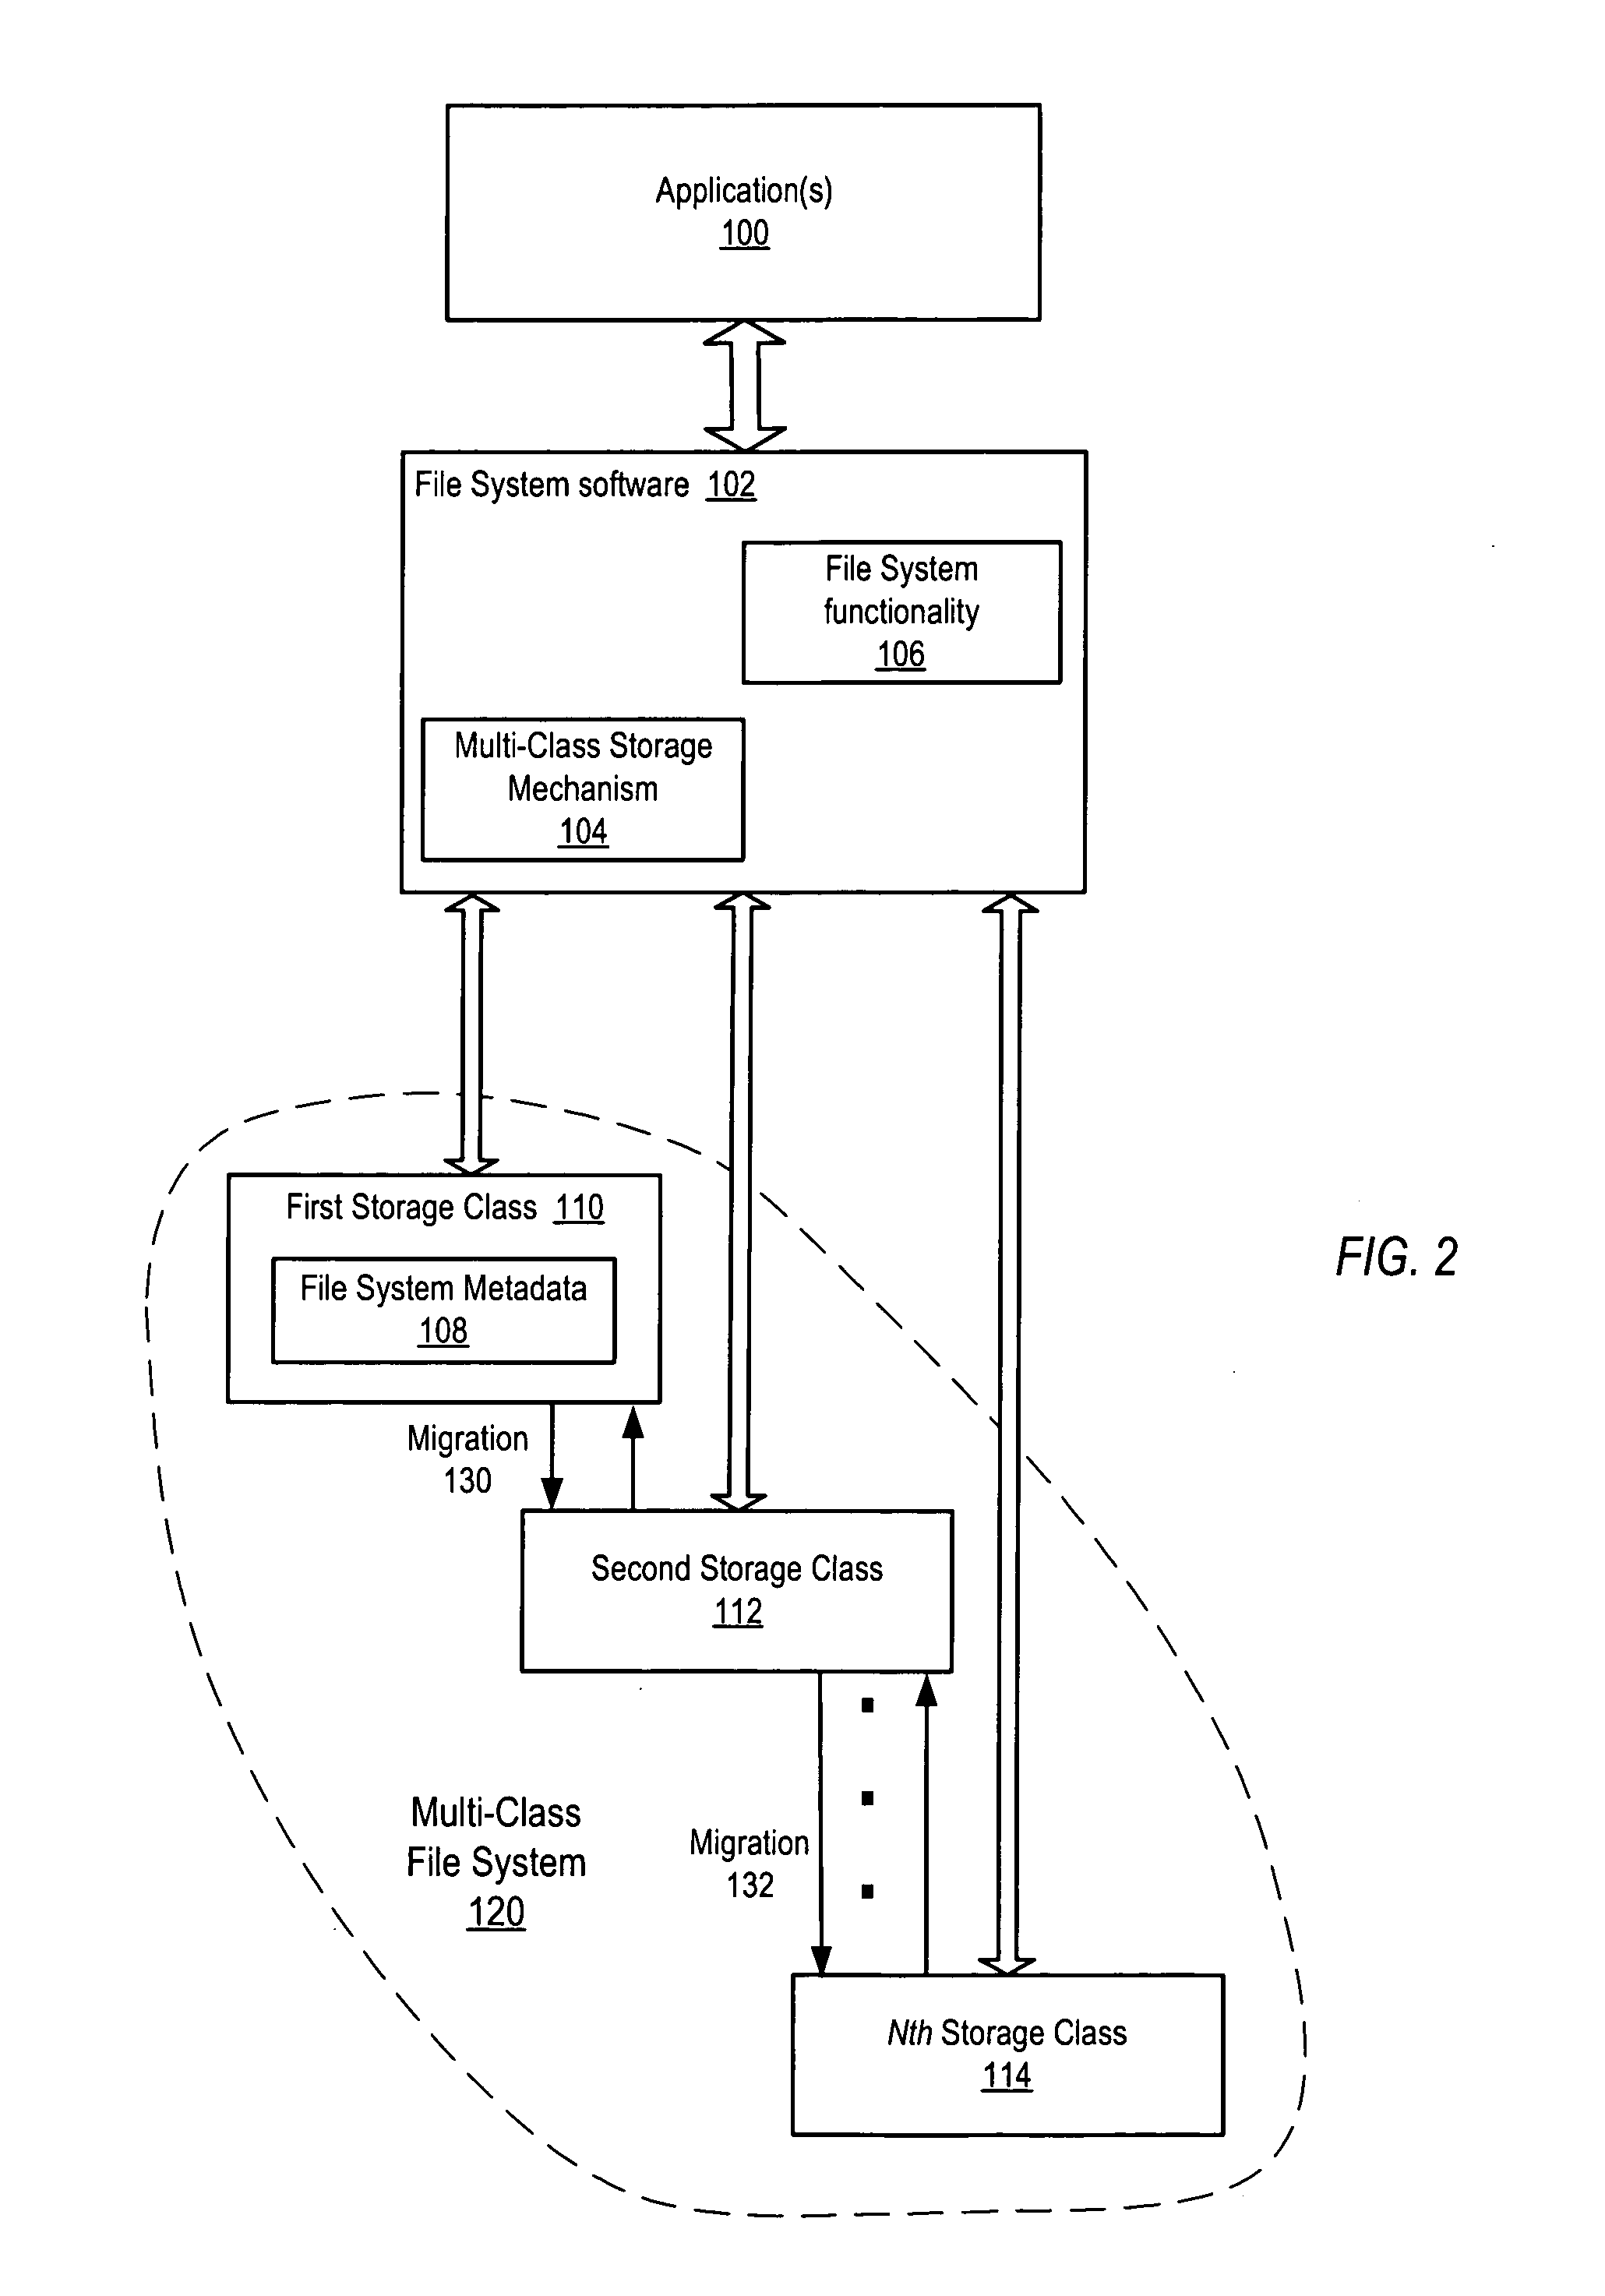 Backup mechanism for a multi-class file system